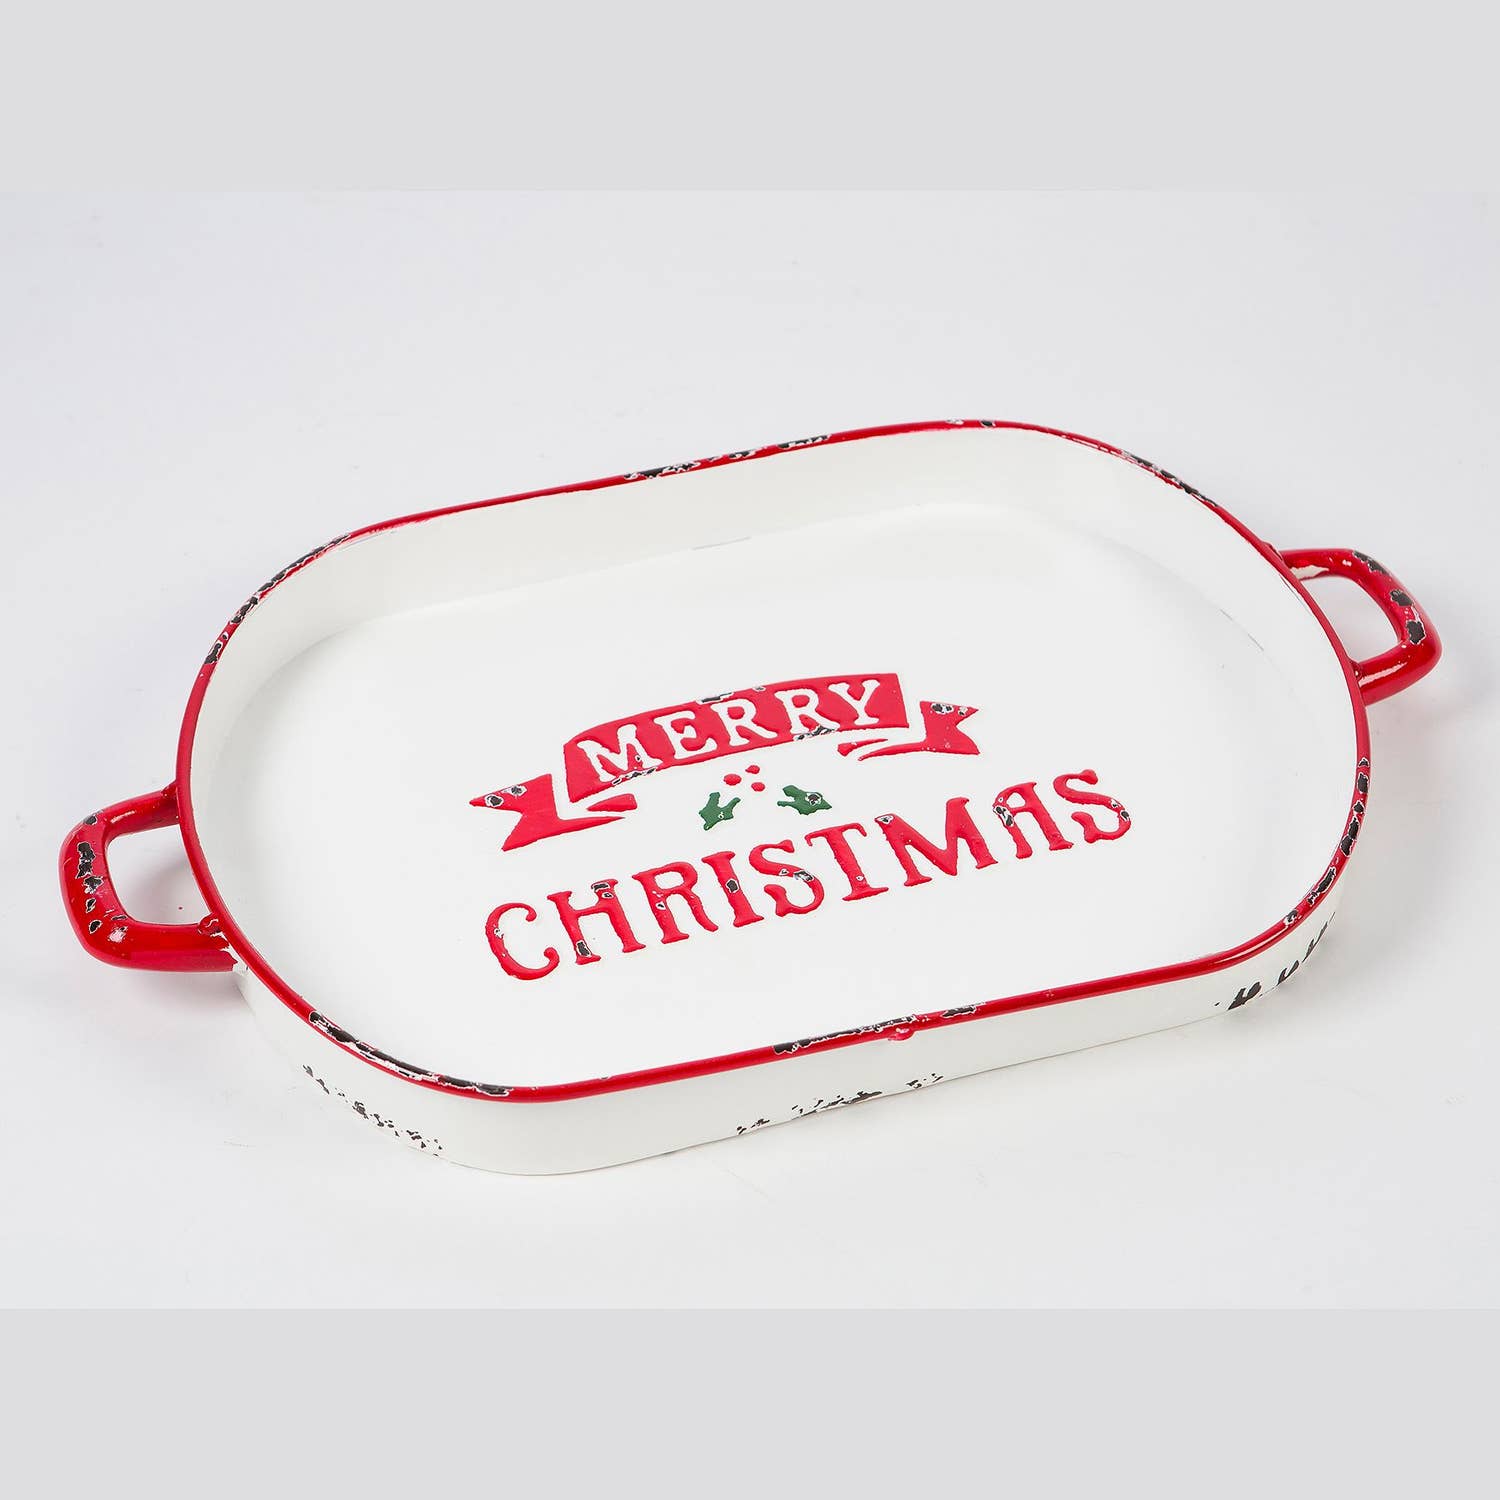 Christmas Decor for Your Home Vintage Merry Christmas Metal Tray with handles and faux distressing.